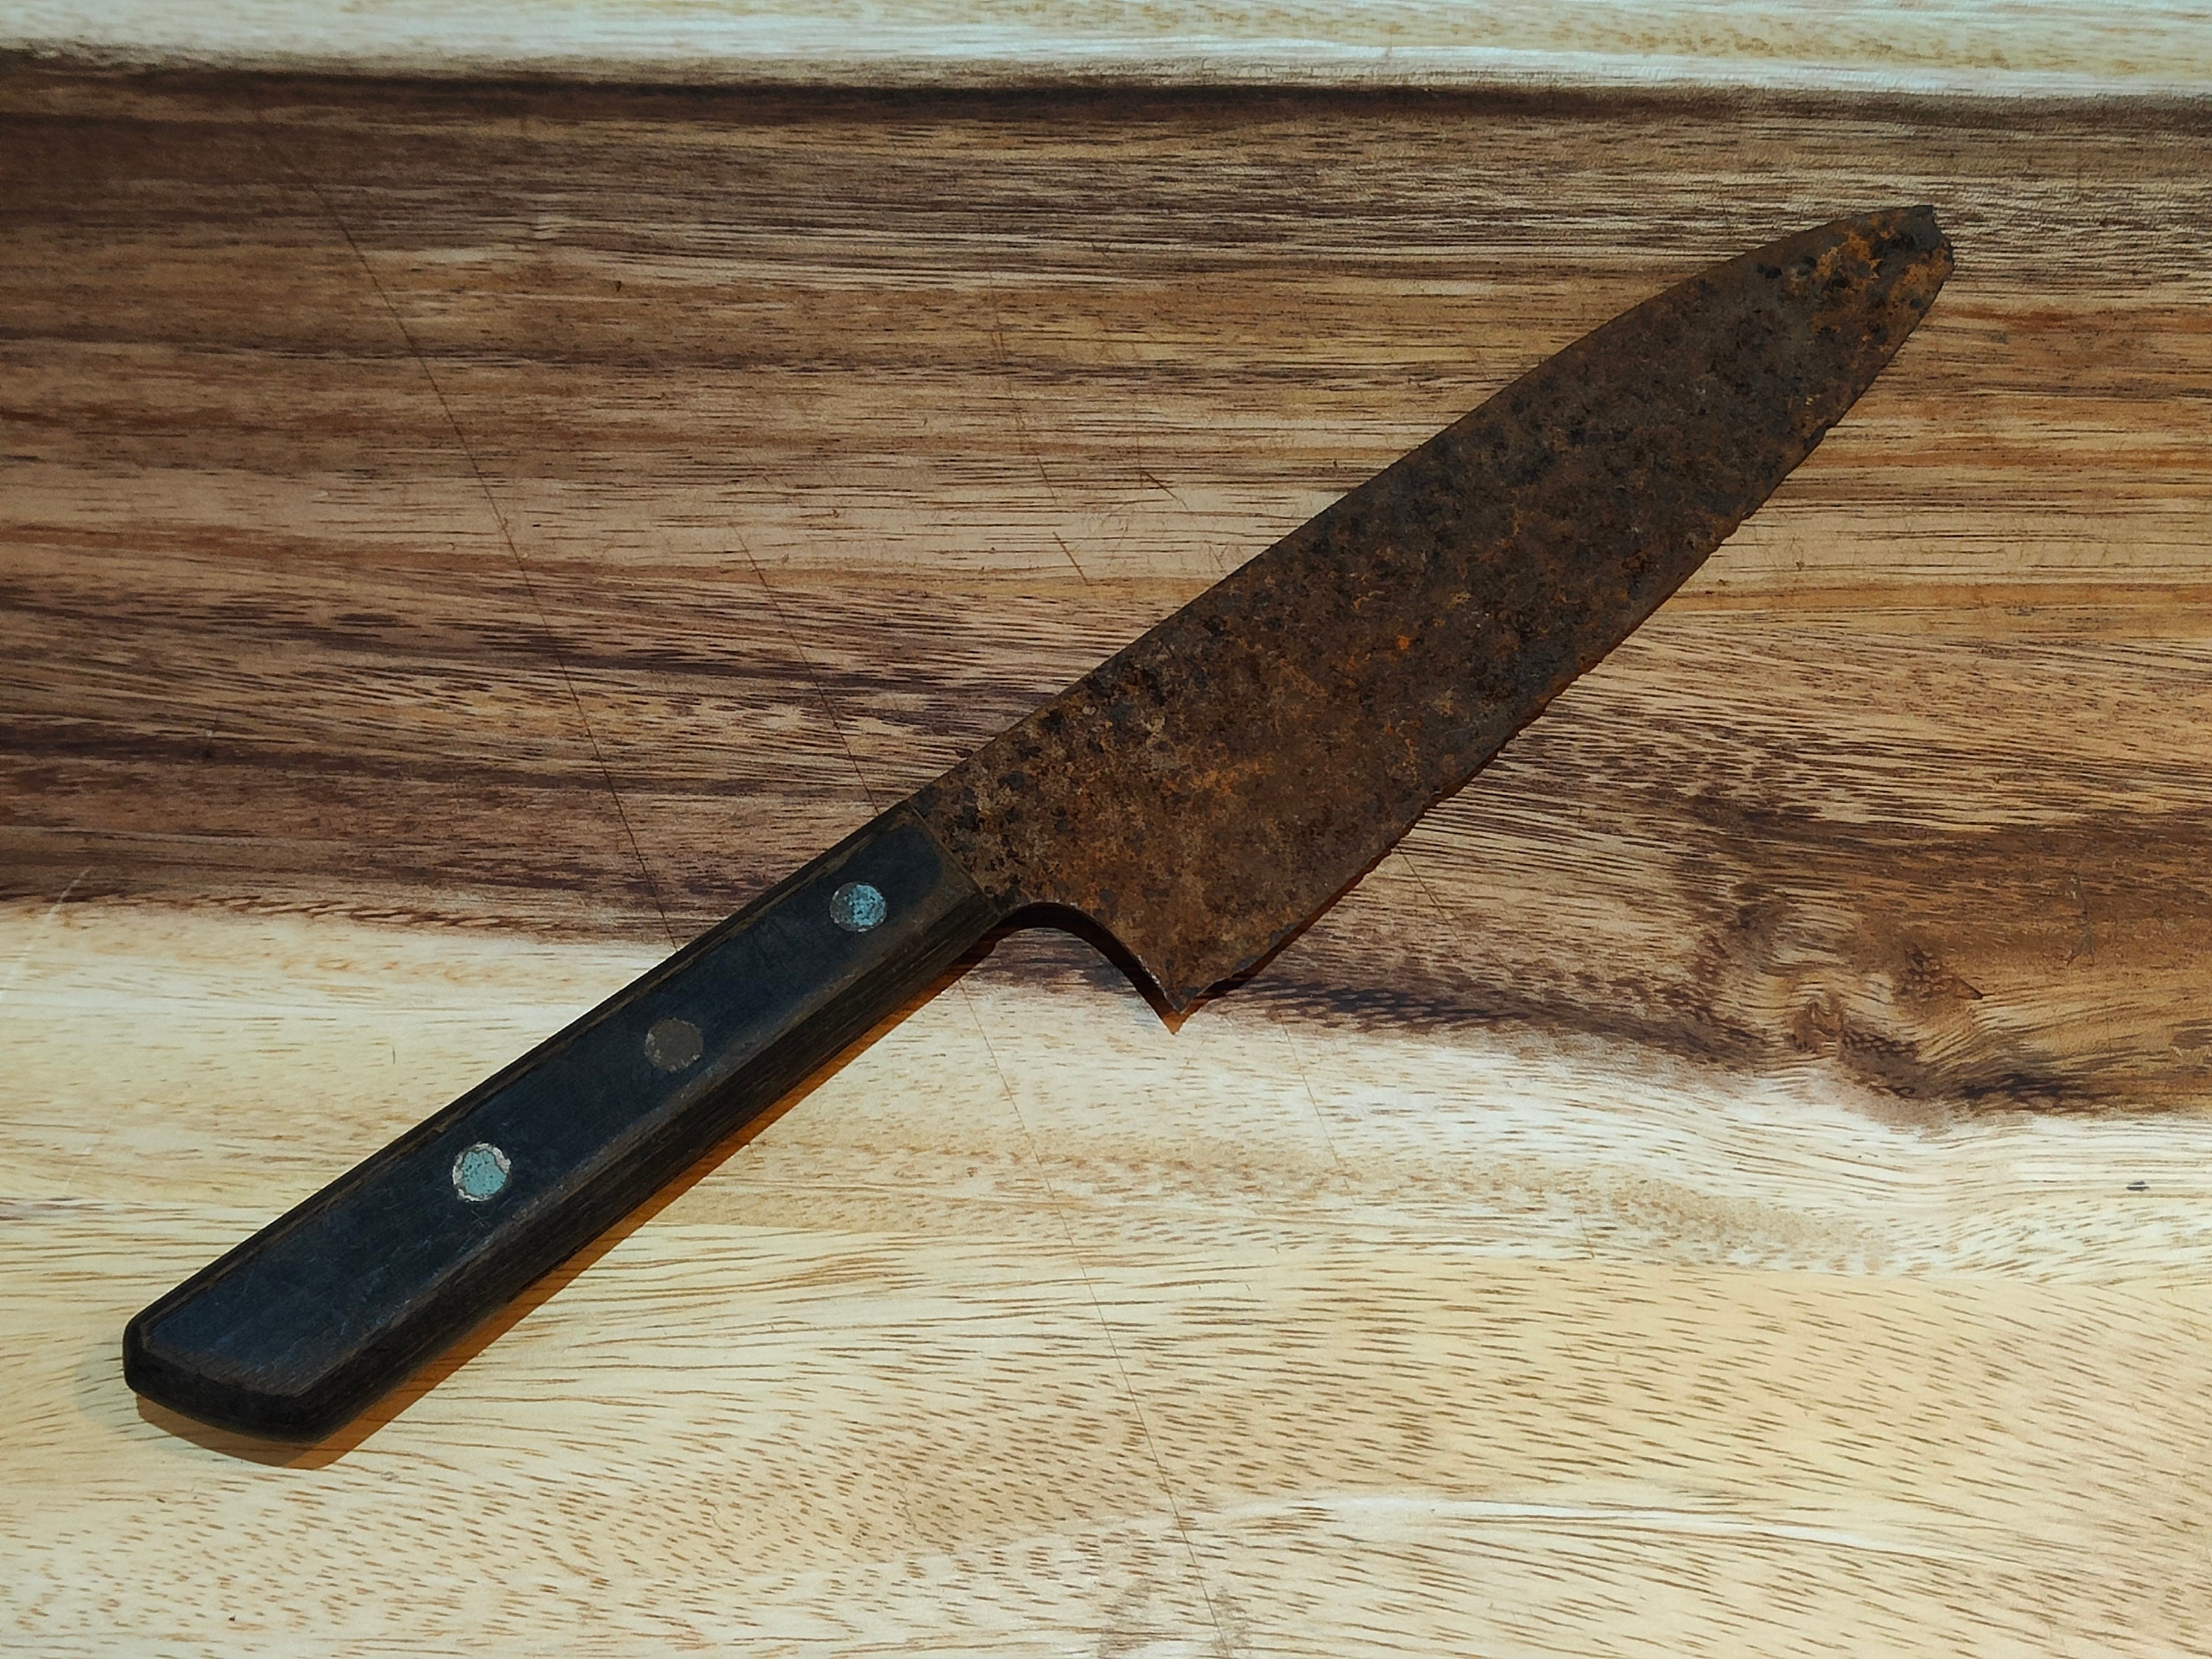 Distressed Antique Serrated Cast Iron, Steel & Wood Hay Knife